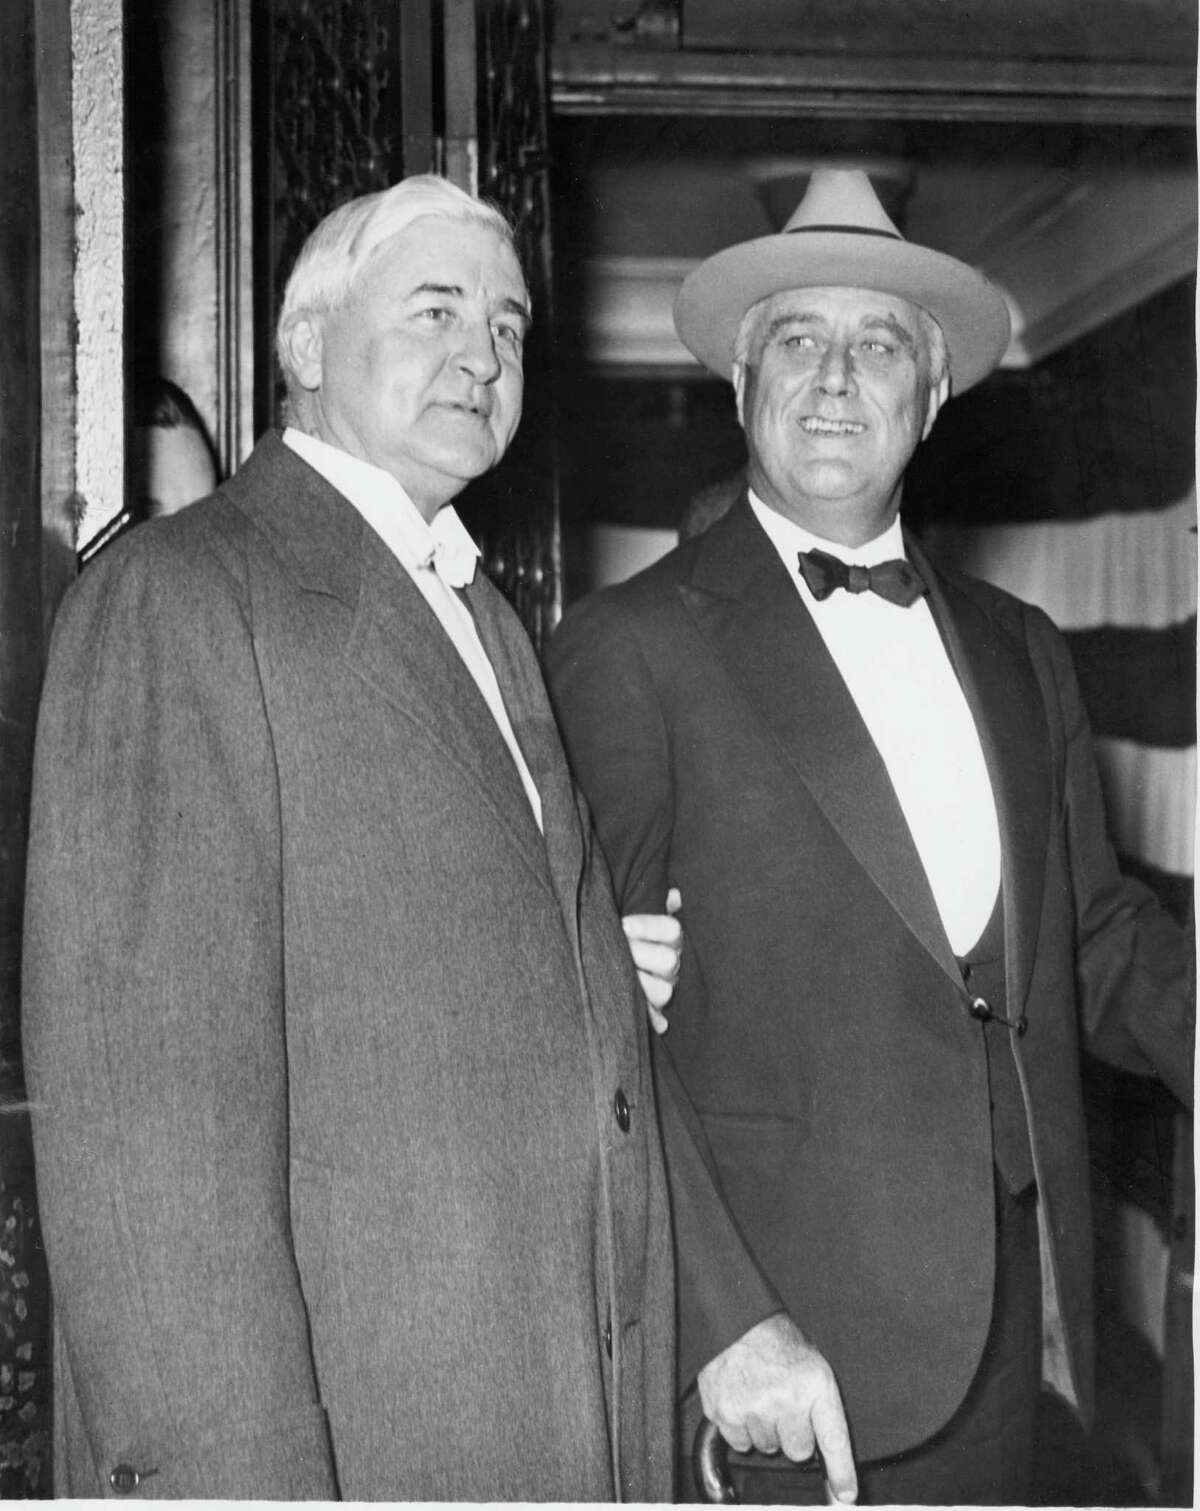 FDR -- JESSE H. JONES AND FRANKLIN DELANO ROOSEVELT unknown date. HOUCHRON CAPTION (11/08/1998): Jesse H. Jones and Franklin Delano Roosevelt. HOUCHRON CAPTION (04/03/2000): The PBS special ``Brother, Can You Spare a Billion?'' documents the remarkable story of Houstonian Jesse H. Jones, who served both Presidents Wilson, left, and Franklin Roosevelt, right. HOUCHRON CAPTION (10/14/2001): Chronicle owner Jesse Jones, left, was deeply involved in politics and was named Commerce secretary by President Roosevelt, right. HOUSTON CHRONICLE SPECIAL SECTION: 100 YEARS / Houston Chronicle / A Century Together.